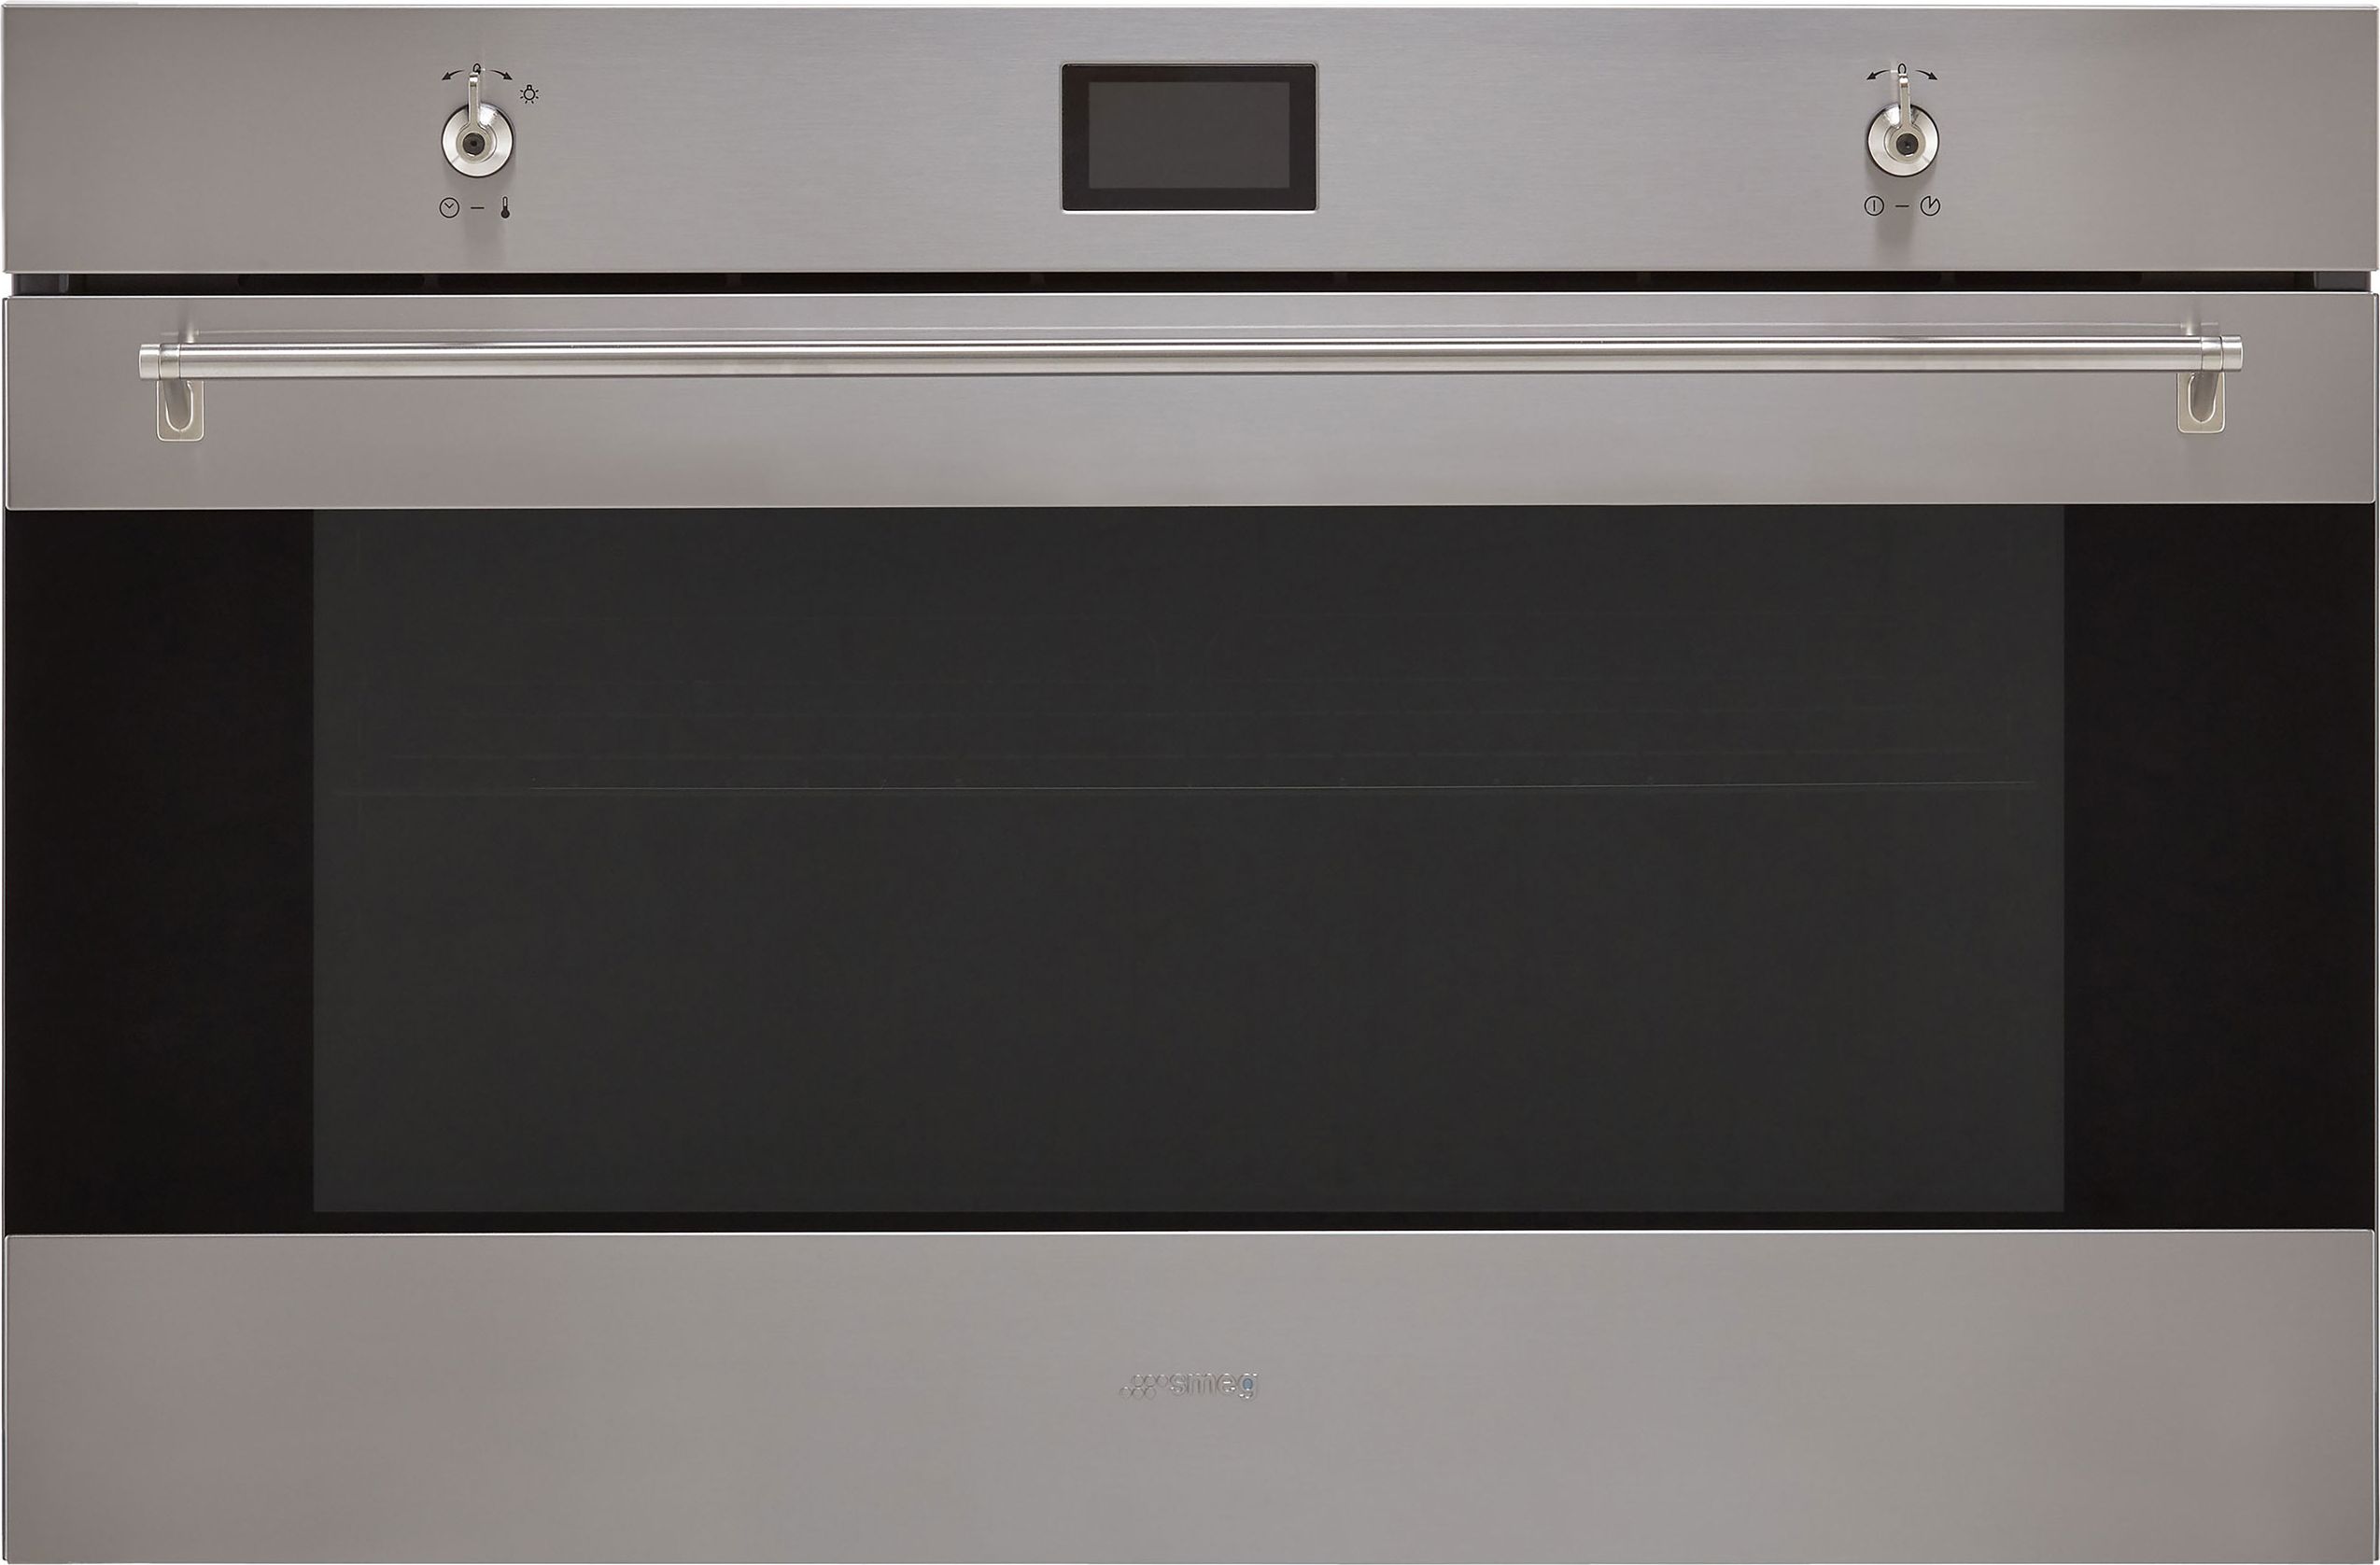 Smeg Classic SF9390X1 Built In Electric Single Oven - Stainless Steel - A+ Rated, Stainless Steel